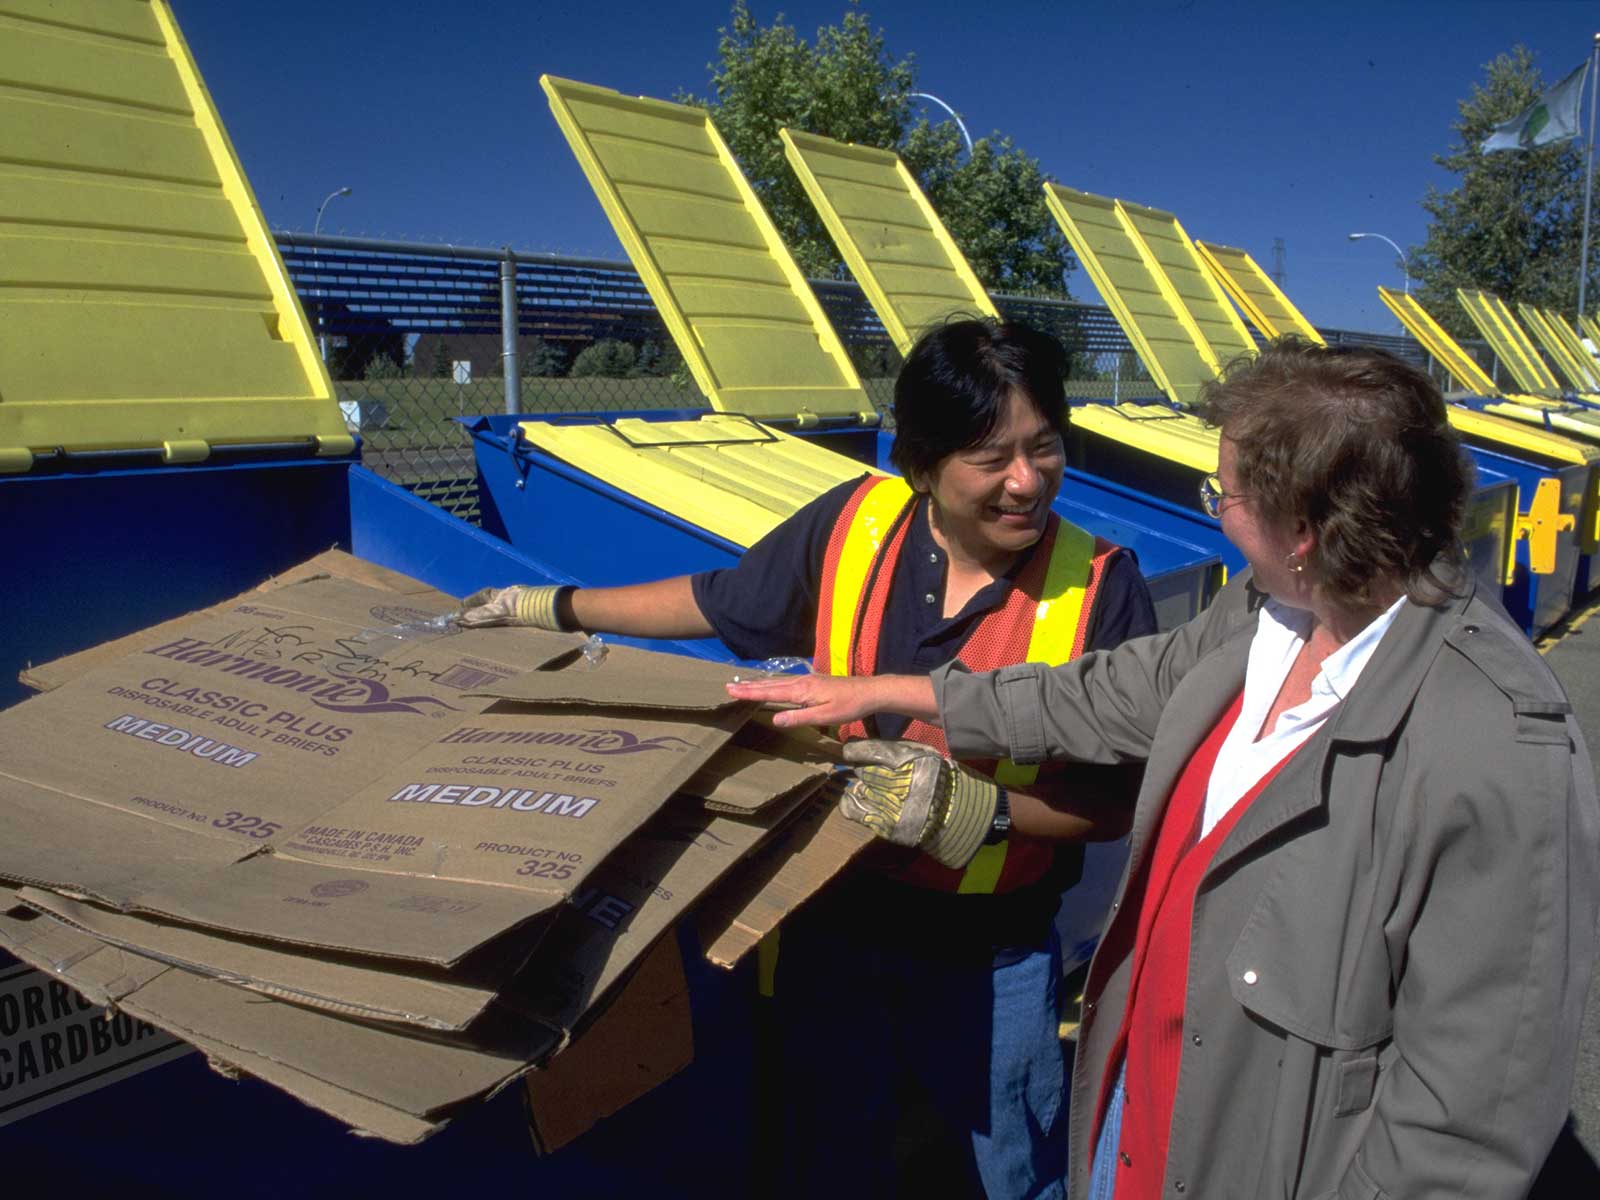 1991 - First Community Recycling Depot Opens